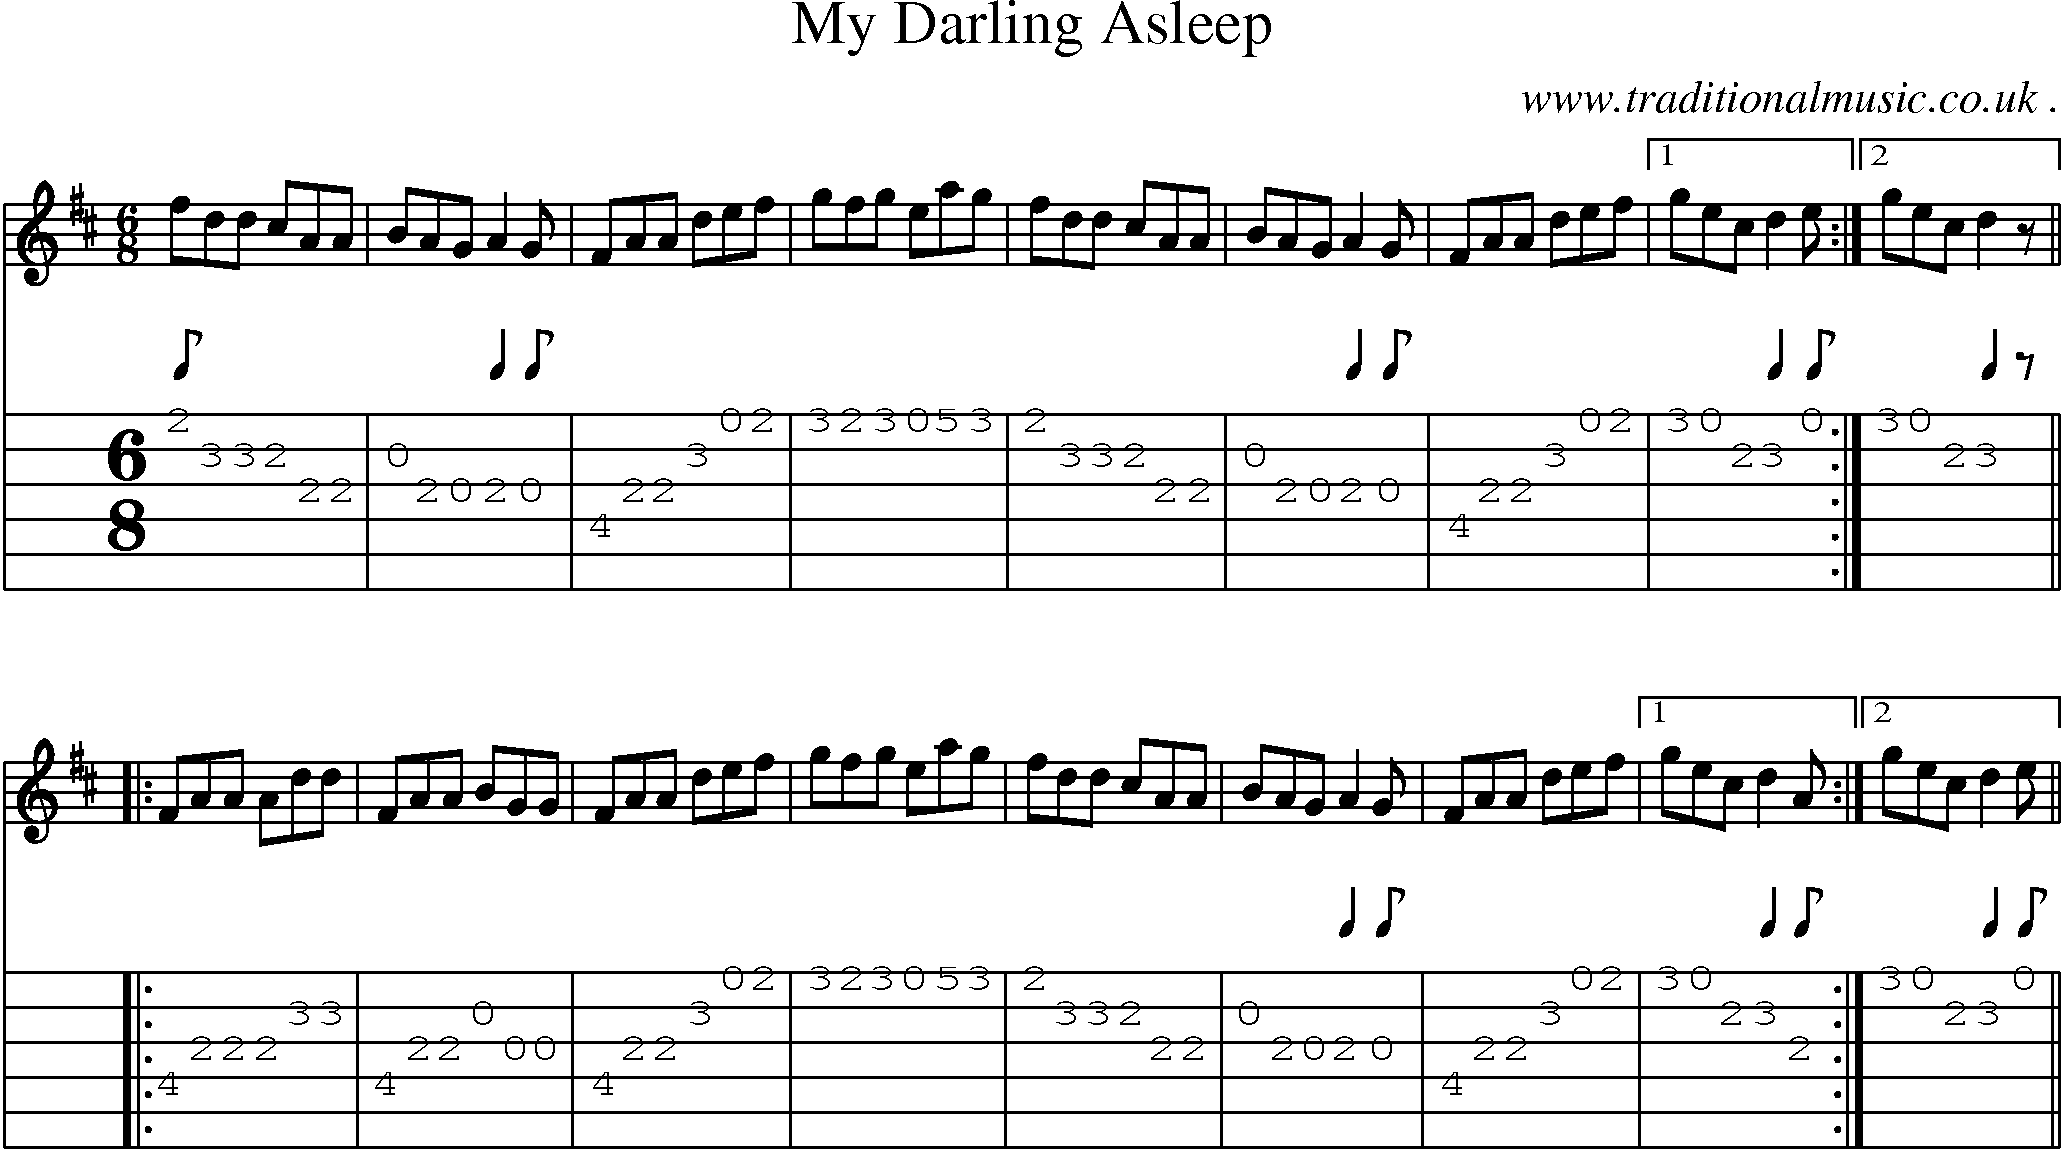 Sheet-Music and Guitar Tabs for My Darling Asleep